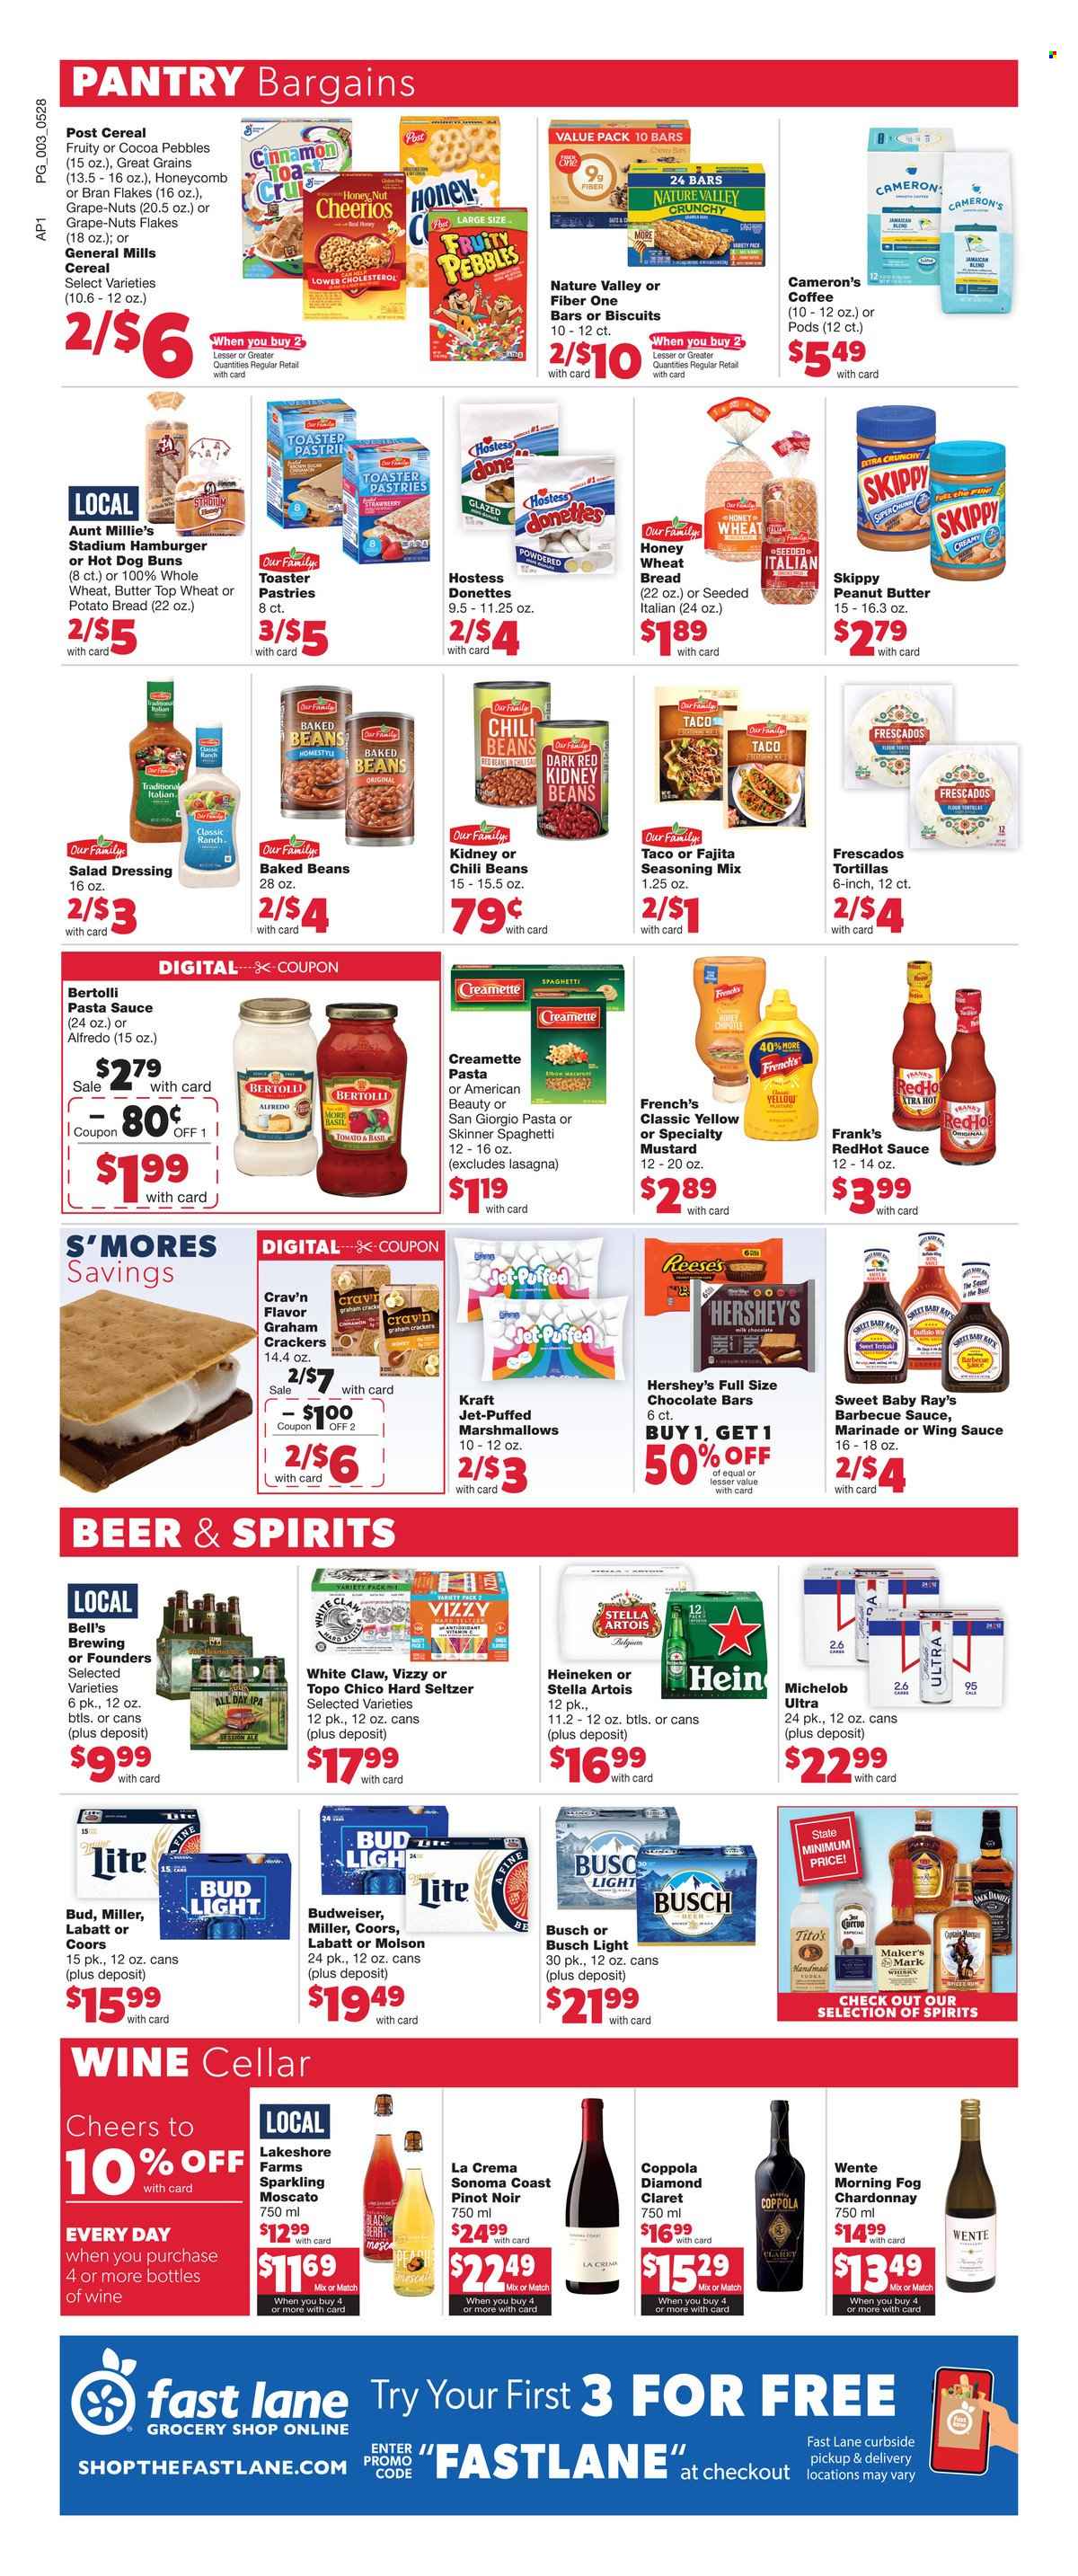 thumbnail - Family Fare Flyer - 05/30/2023 - 06/03/2023 - Sales products - wheat bread, buns, flour tortillas, spaghetti, Jack Daniel's, pasta sauce, macaroni, Kraft®, Bertolli, Reese's, Hershey's, graham crackers, marshmallows, milk chocolate, cereal bar, crackers, biscuit, chocolate bar, General Mills, red beans, kidney beans, chili beans, baked beans, cereals, Cheerios, bran flakes, Fruity Pebbles, Nature Valley, Fiber One, Creamette, Skinner Pasta, spice, cinnamon, Fajita seasoning, BBQ sauce, mustard, salad dressing, dressing, marinade, wing sauce, peanut butter, sparkling water, coffee, red wine, white wine, Chardonnay, wine, Pinot Noir, alcohol, Moscato, vodka, White Claw, Hard Seltzer, whisky, beer, Busch, Stella Artois, Bud Light, Heineken, Miller, IPA, Bell's, Topo Chico, XTRA, Budweiser, Coors, Michelob. Page 3.